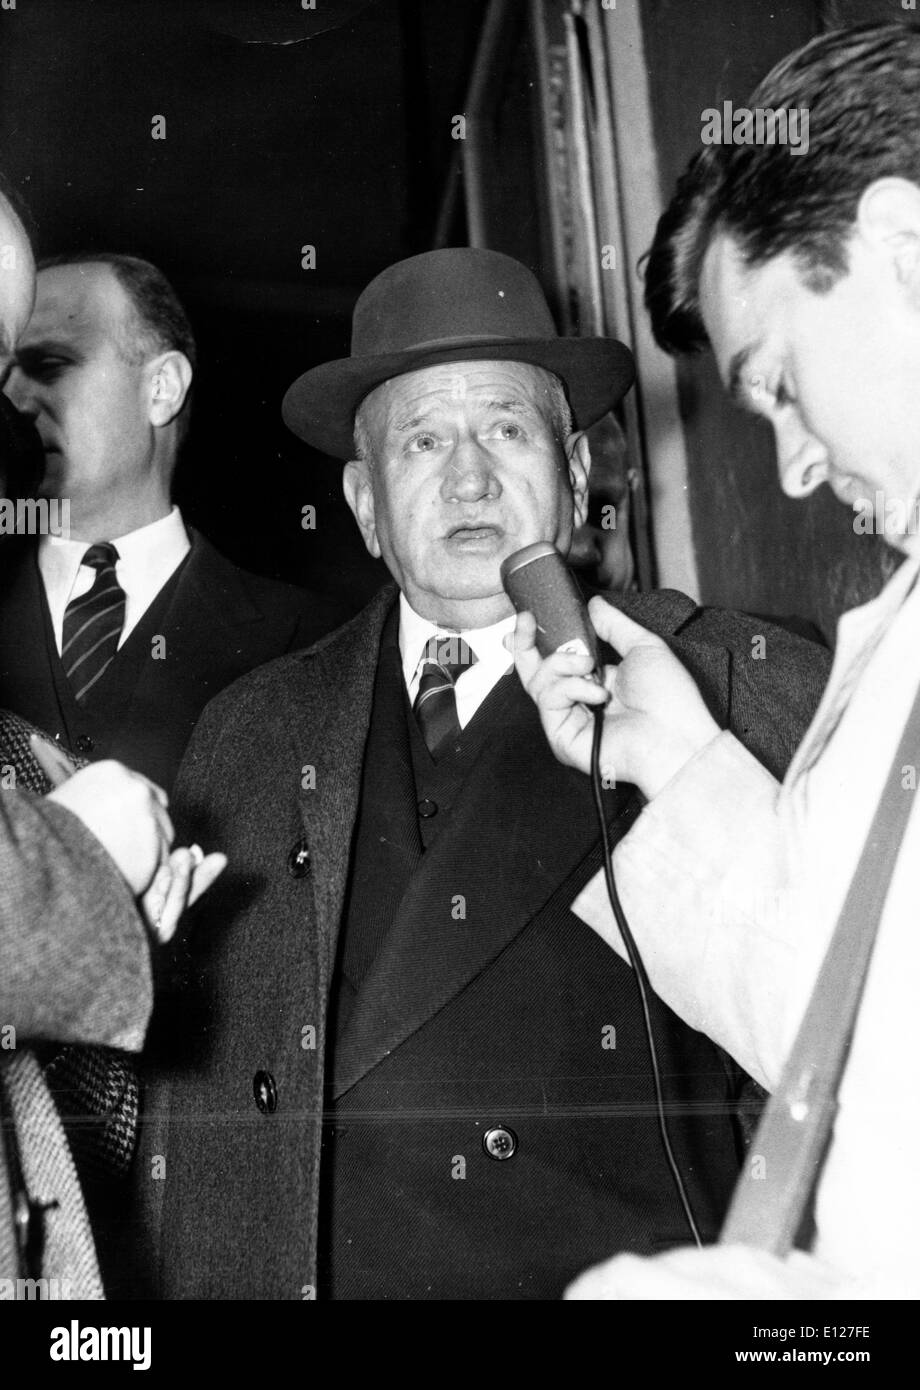 Apr 01, 2009 - London, England, United Kingdom - EDOUARD DALADIER (18 June 1884 - 10 October 1970) was a French Radical politician, and Prime Minister of France at the start of the Second World War. (Credit Image: KEYSTONE Pictures USA/ZUMAPRESS.com) Stock Photo